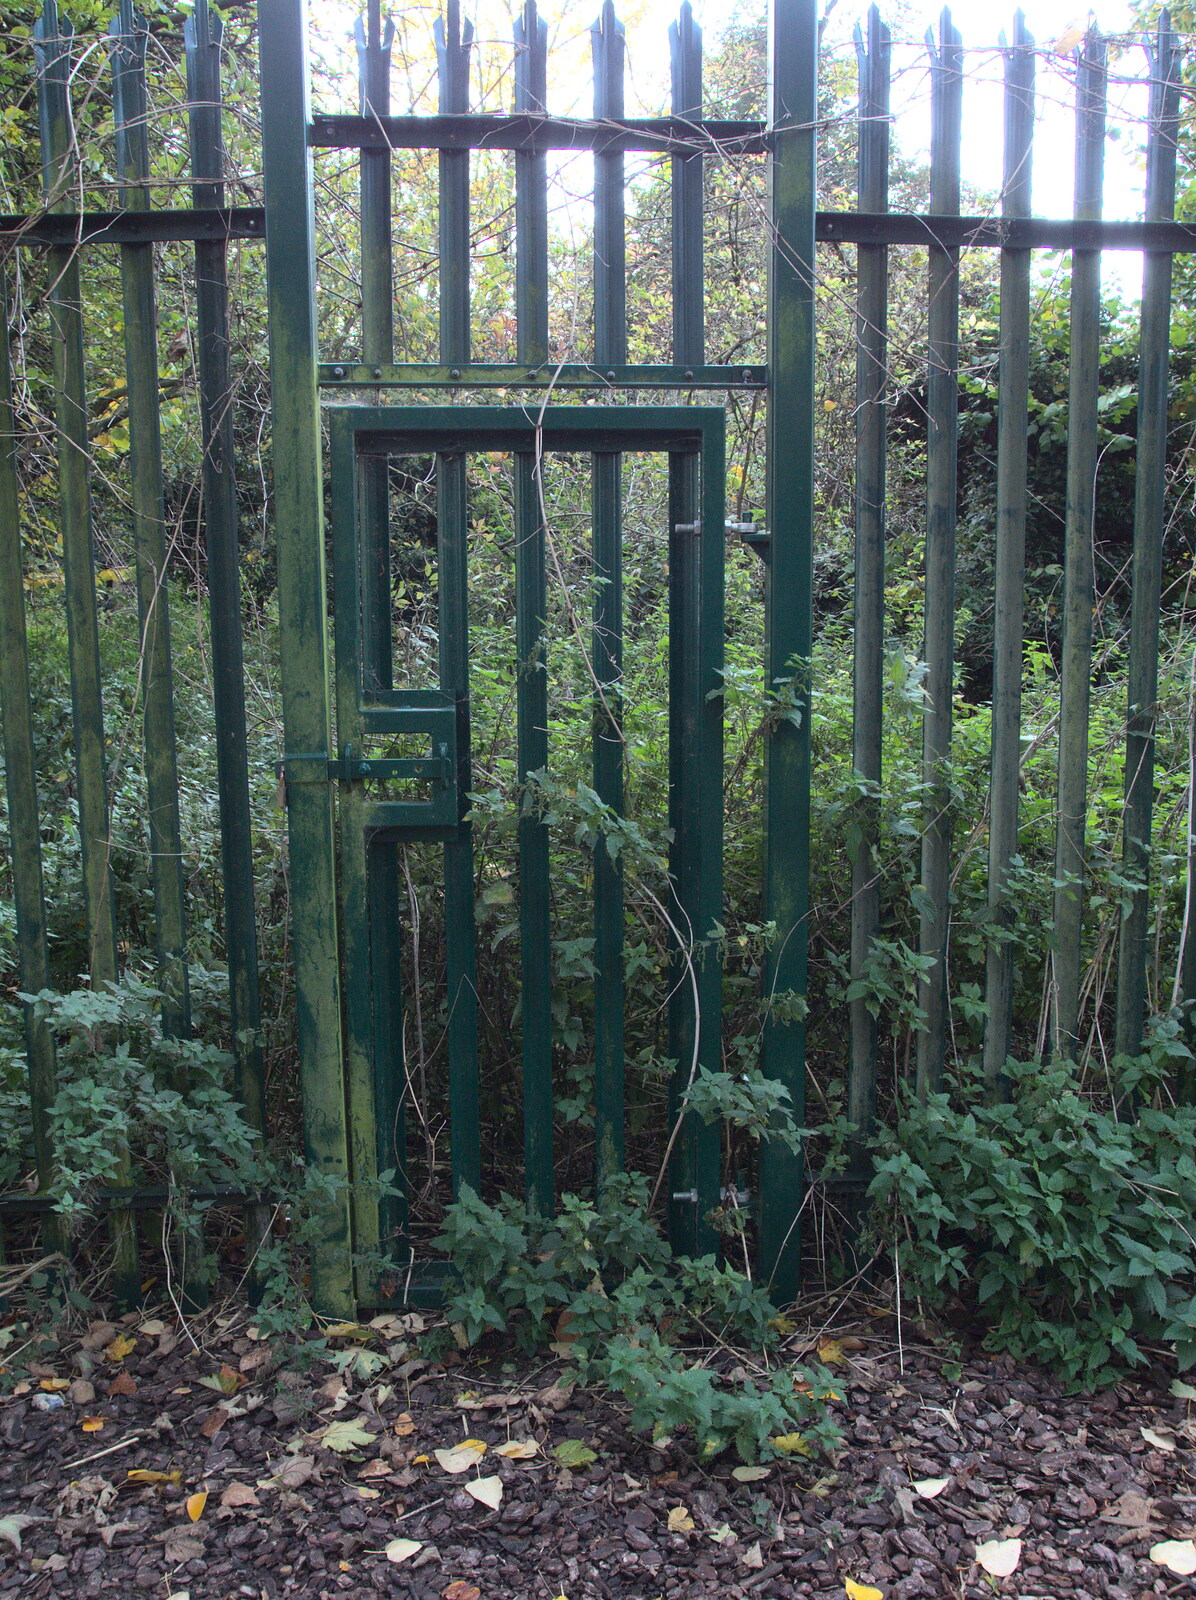 An overgrown wilderness behind a steel fence from Abbey Gardens in Autumn, Bury St. Edmunds, Suffolk - 27th October 2015